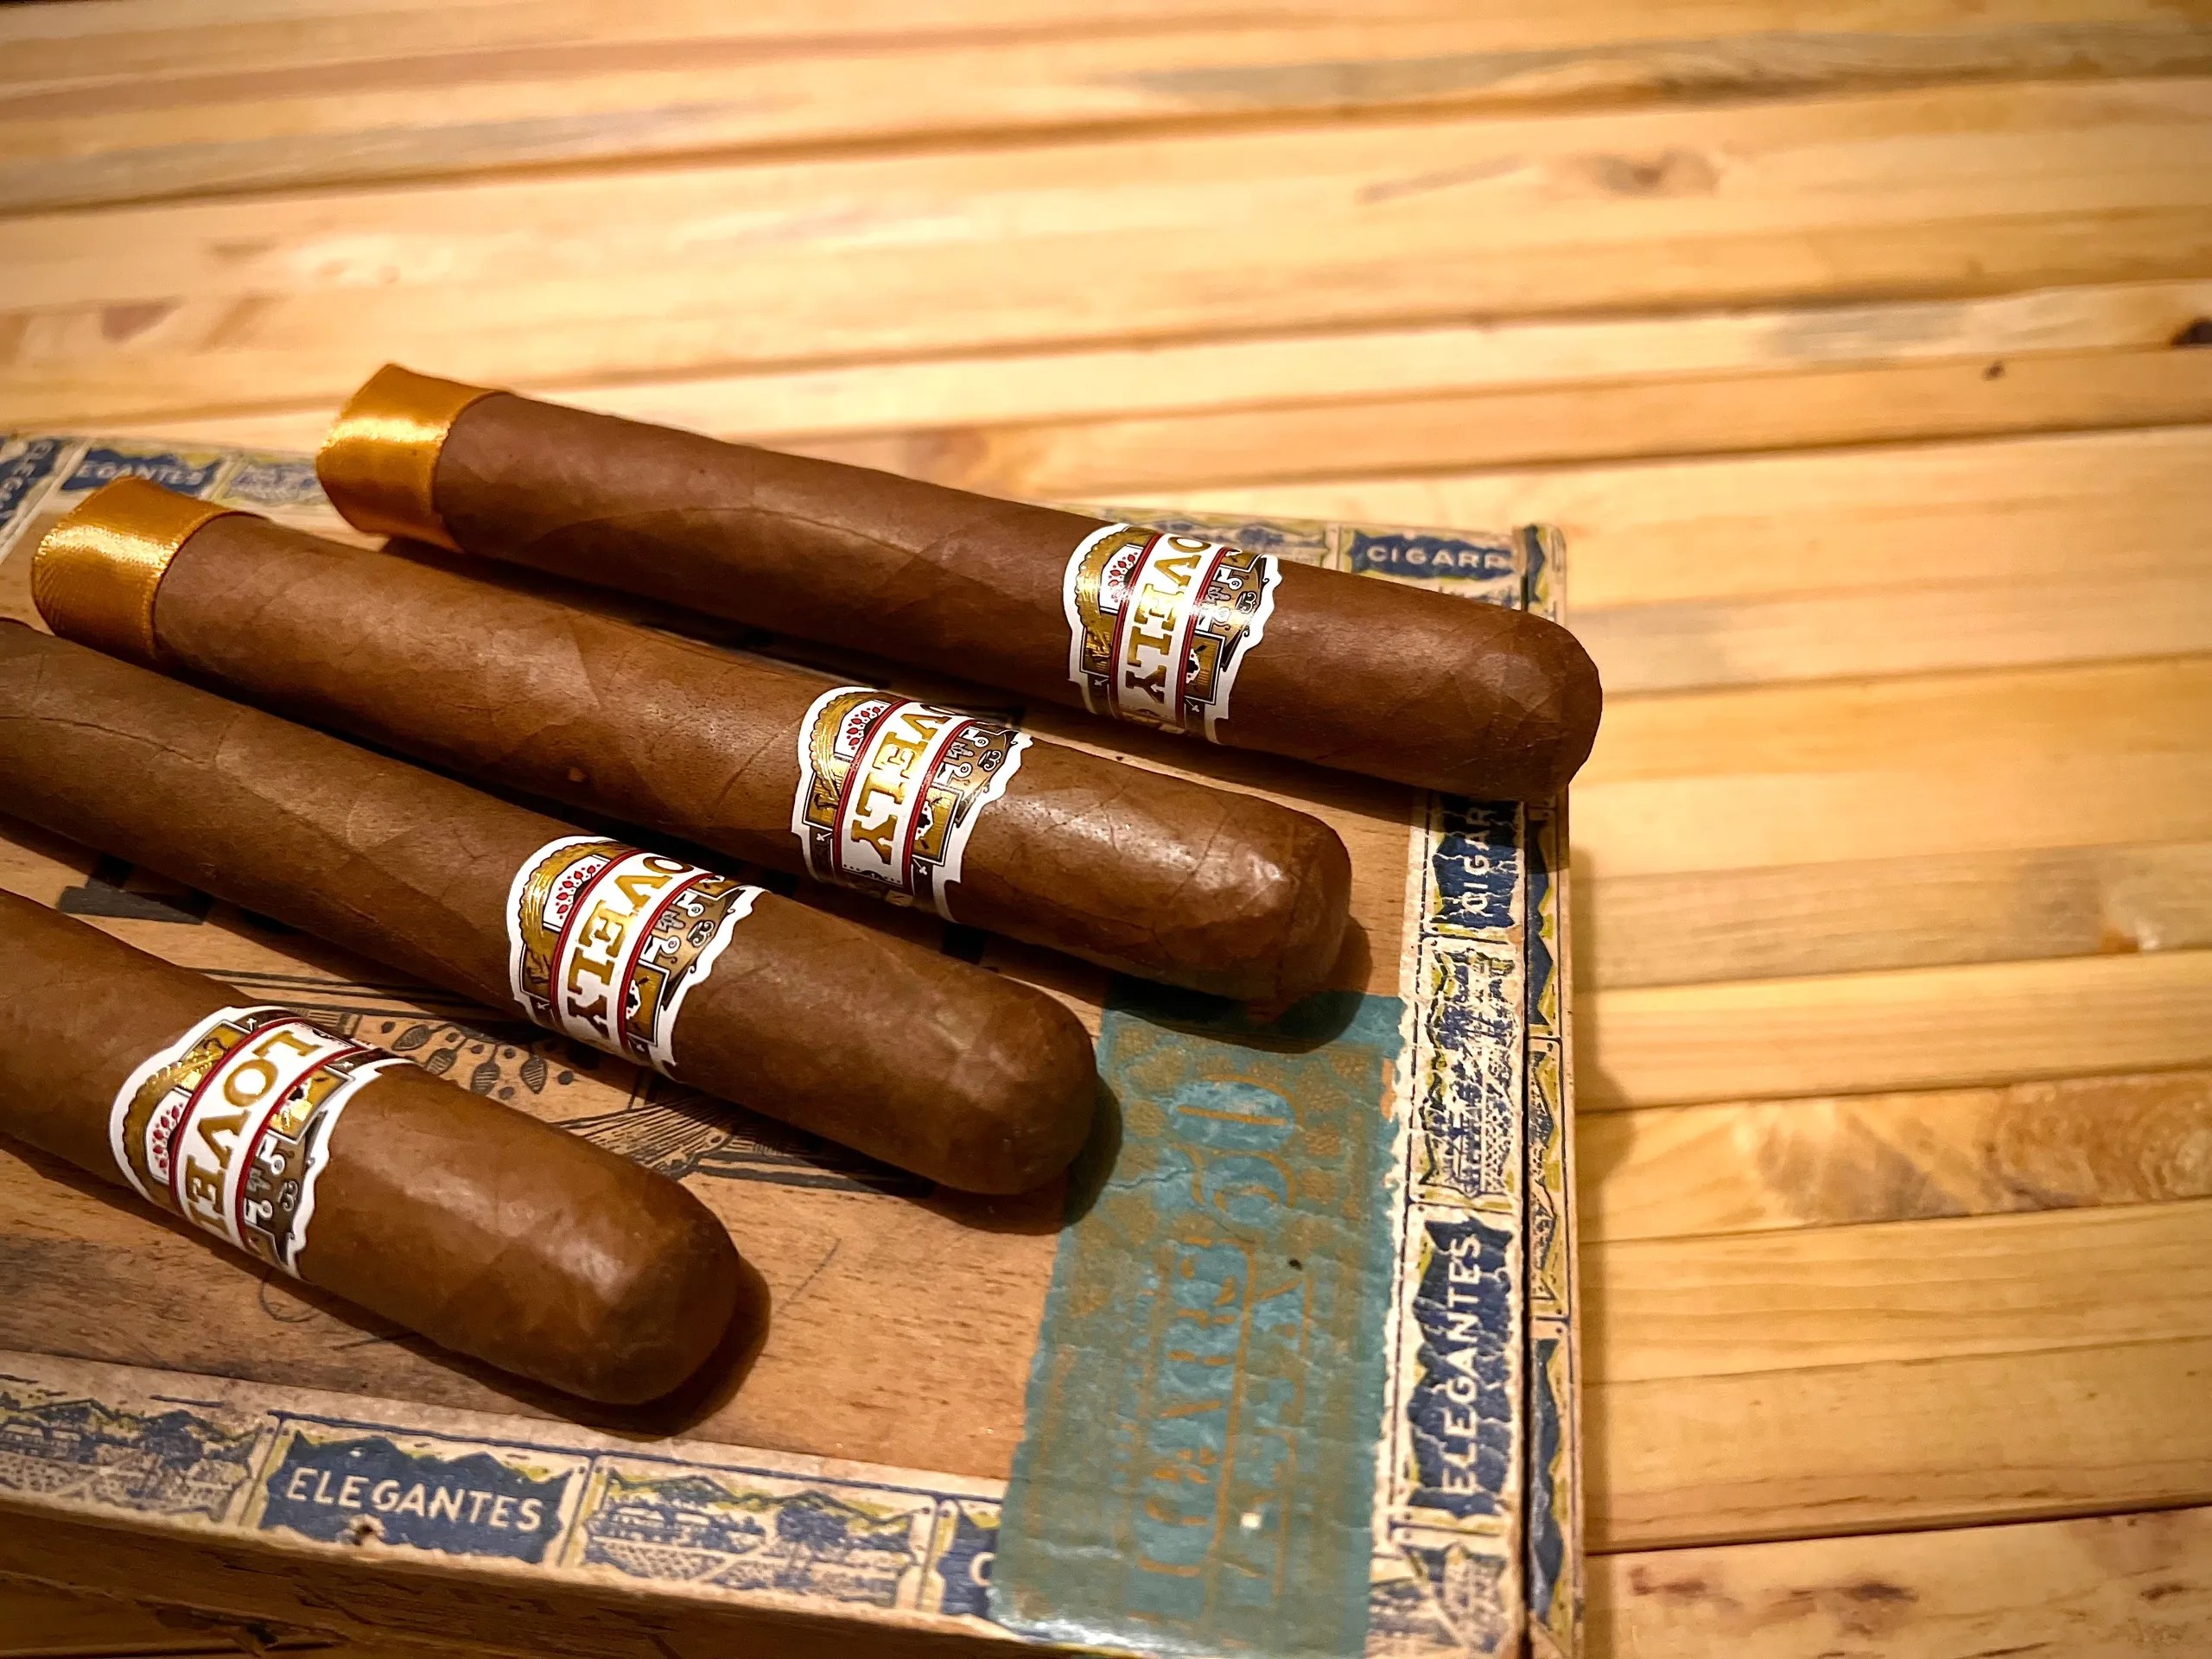 Ain't They Lovely - Lovely Cigars lined up with core labels.